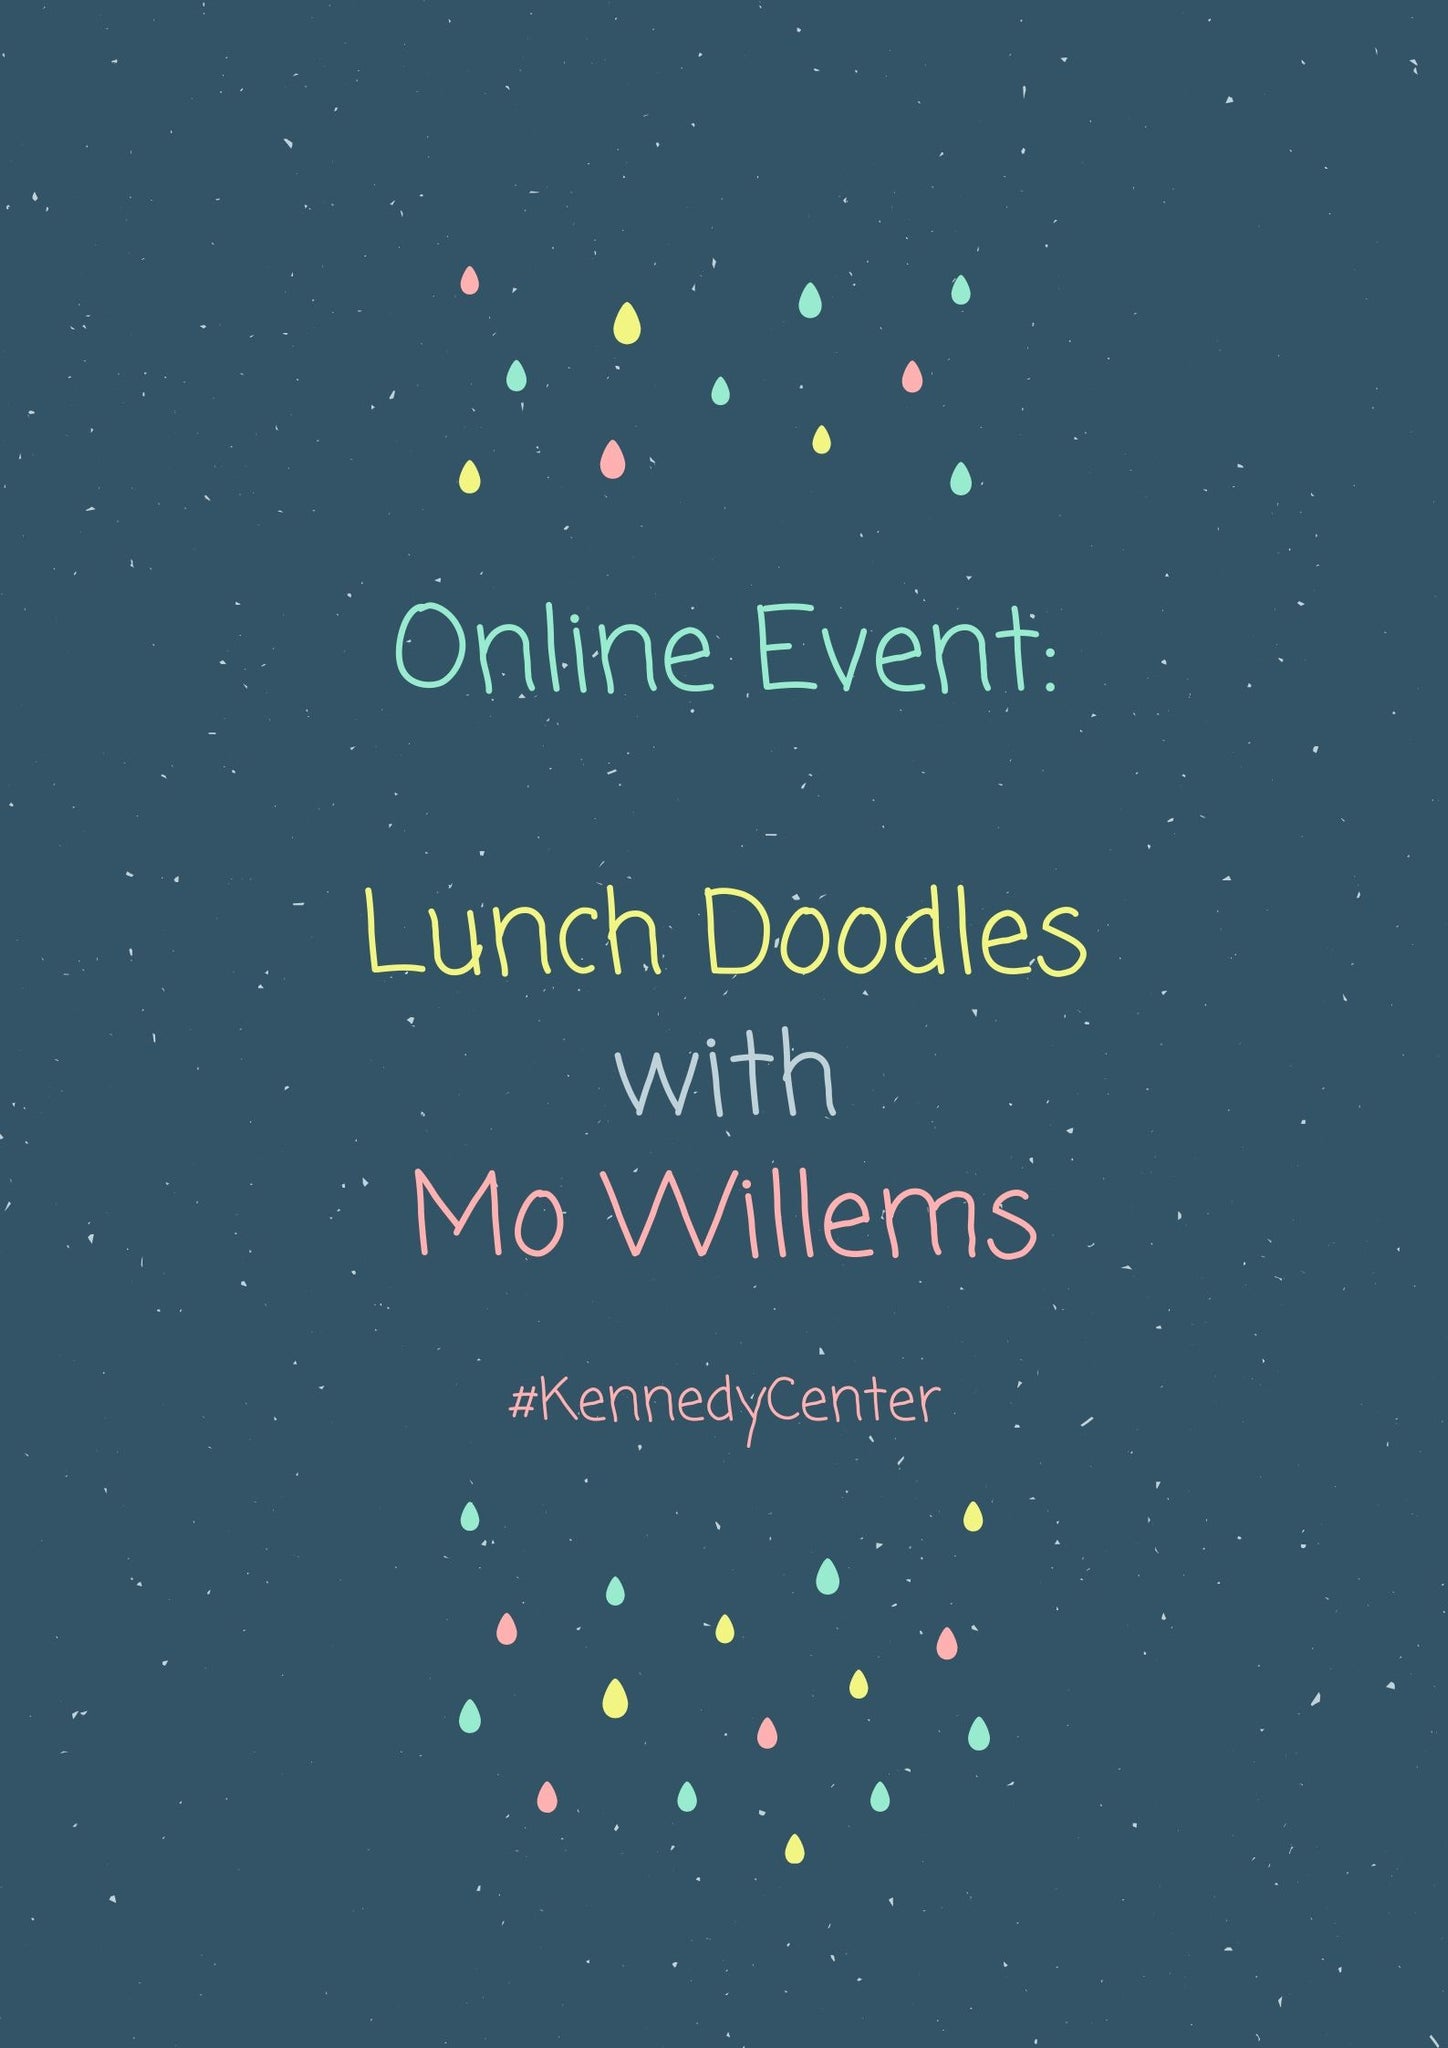 Online Event: LUNCH DOODLES with Mo Willems! #KennedyCenter